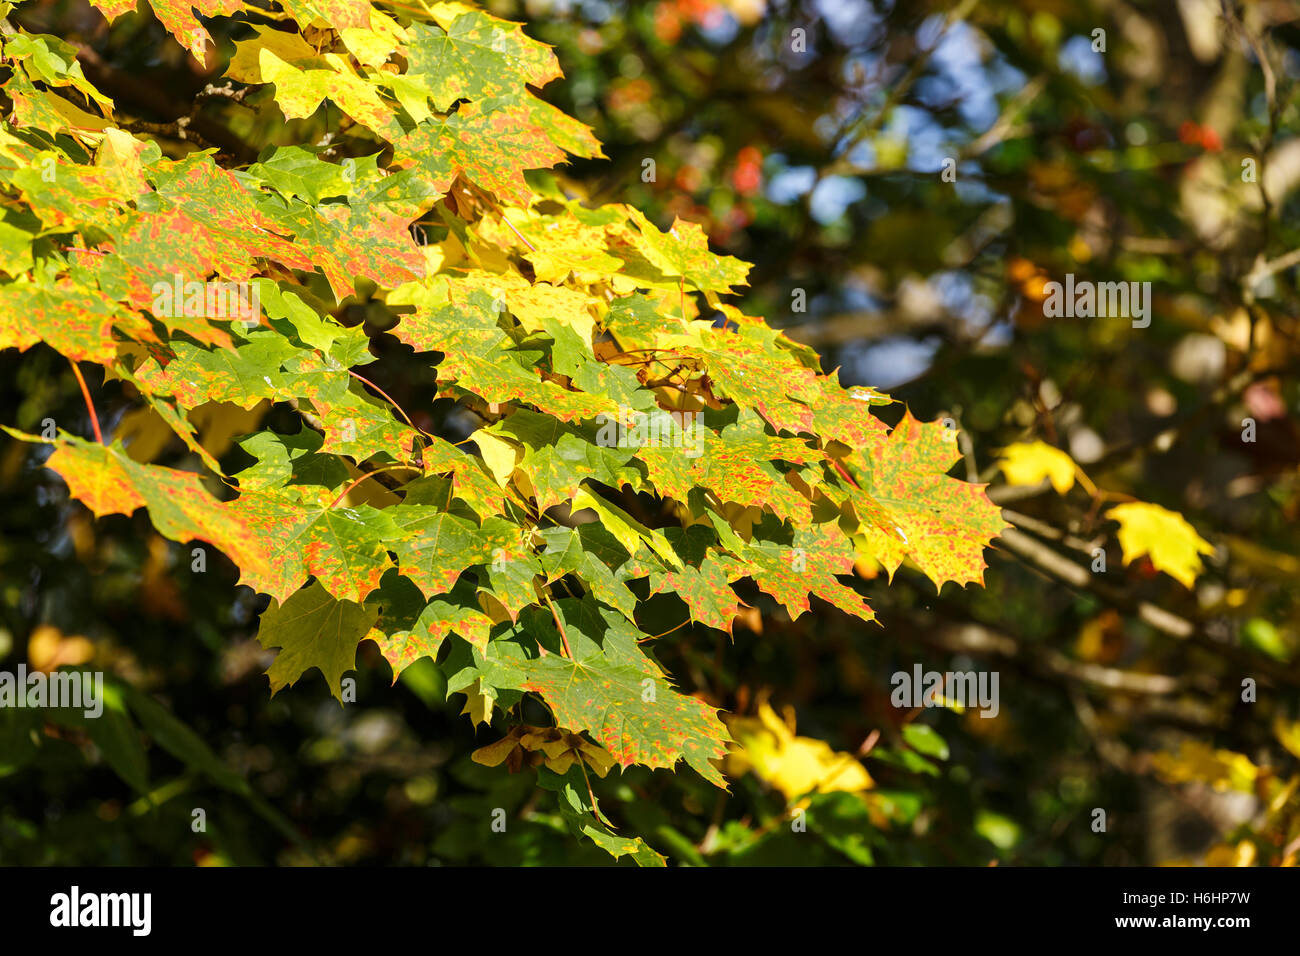 Sycamore (Acer pseudoplatanus) leaves still on the tree in pretty autumn colours in a garden in southern England Stock Photo